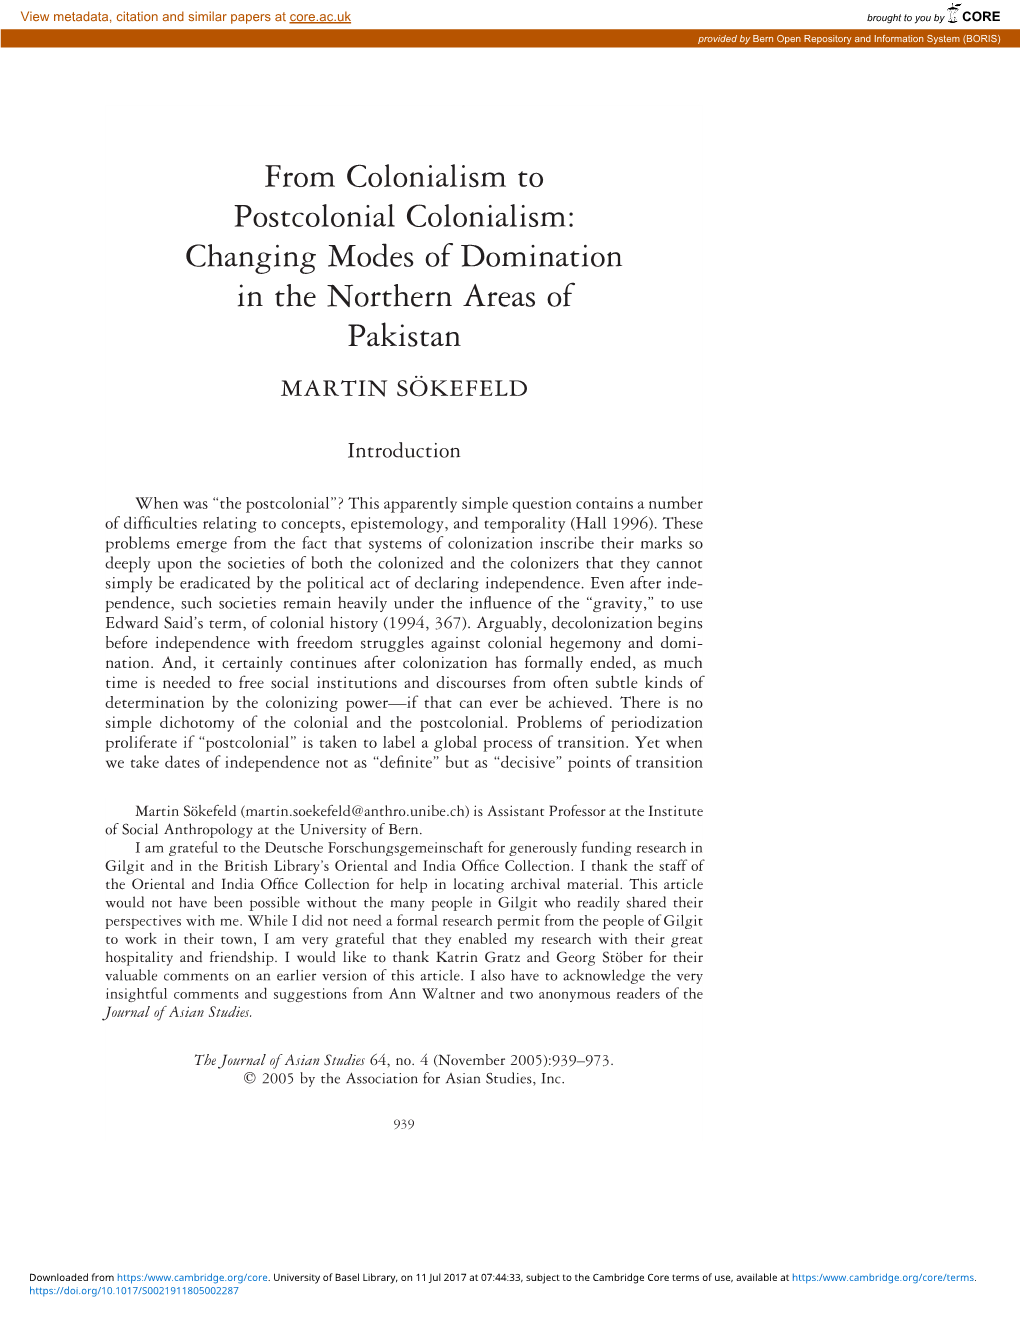 From Colonialism to Postcolonial Colonialism: Changing Modes of Domination in the Northern Areas of Pakistan MARTIN SO¨ KEFELD